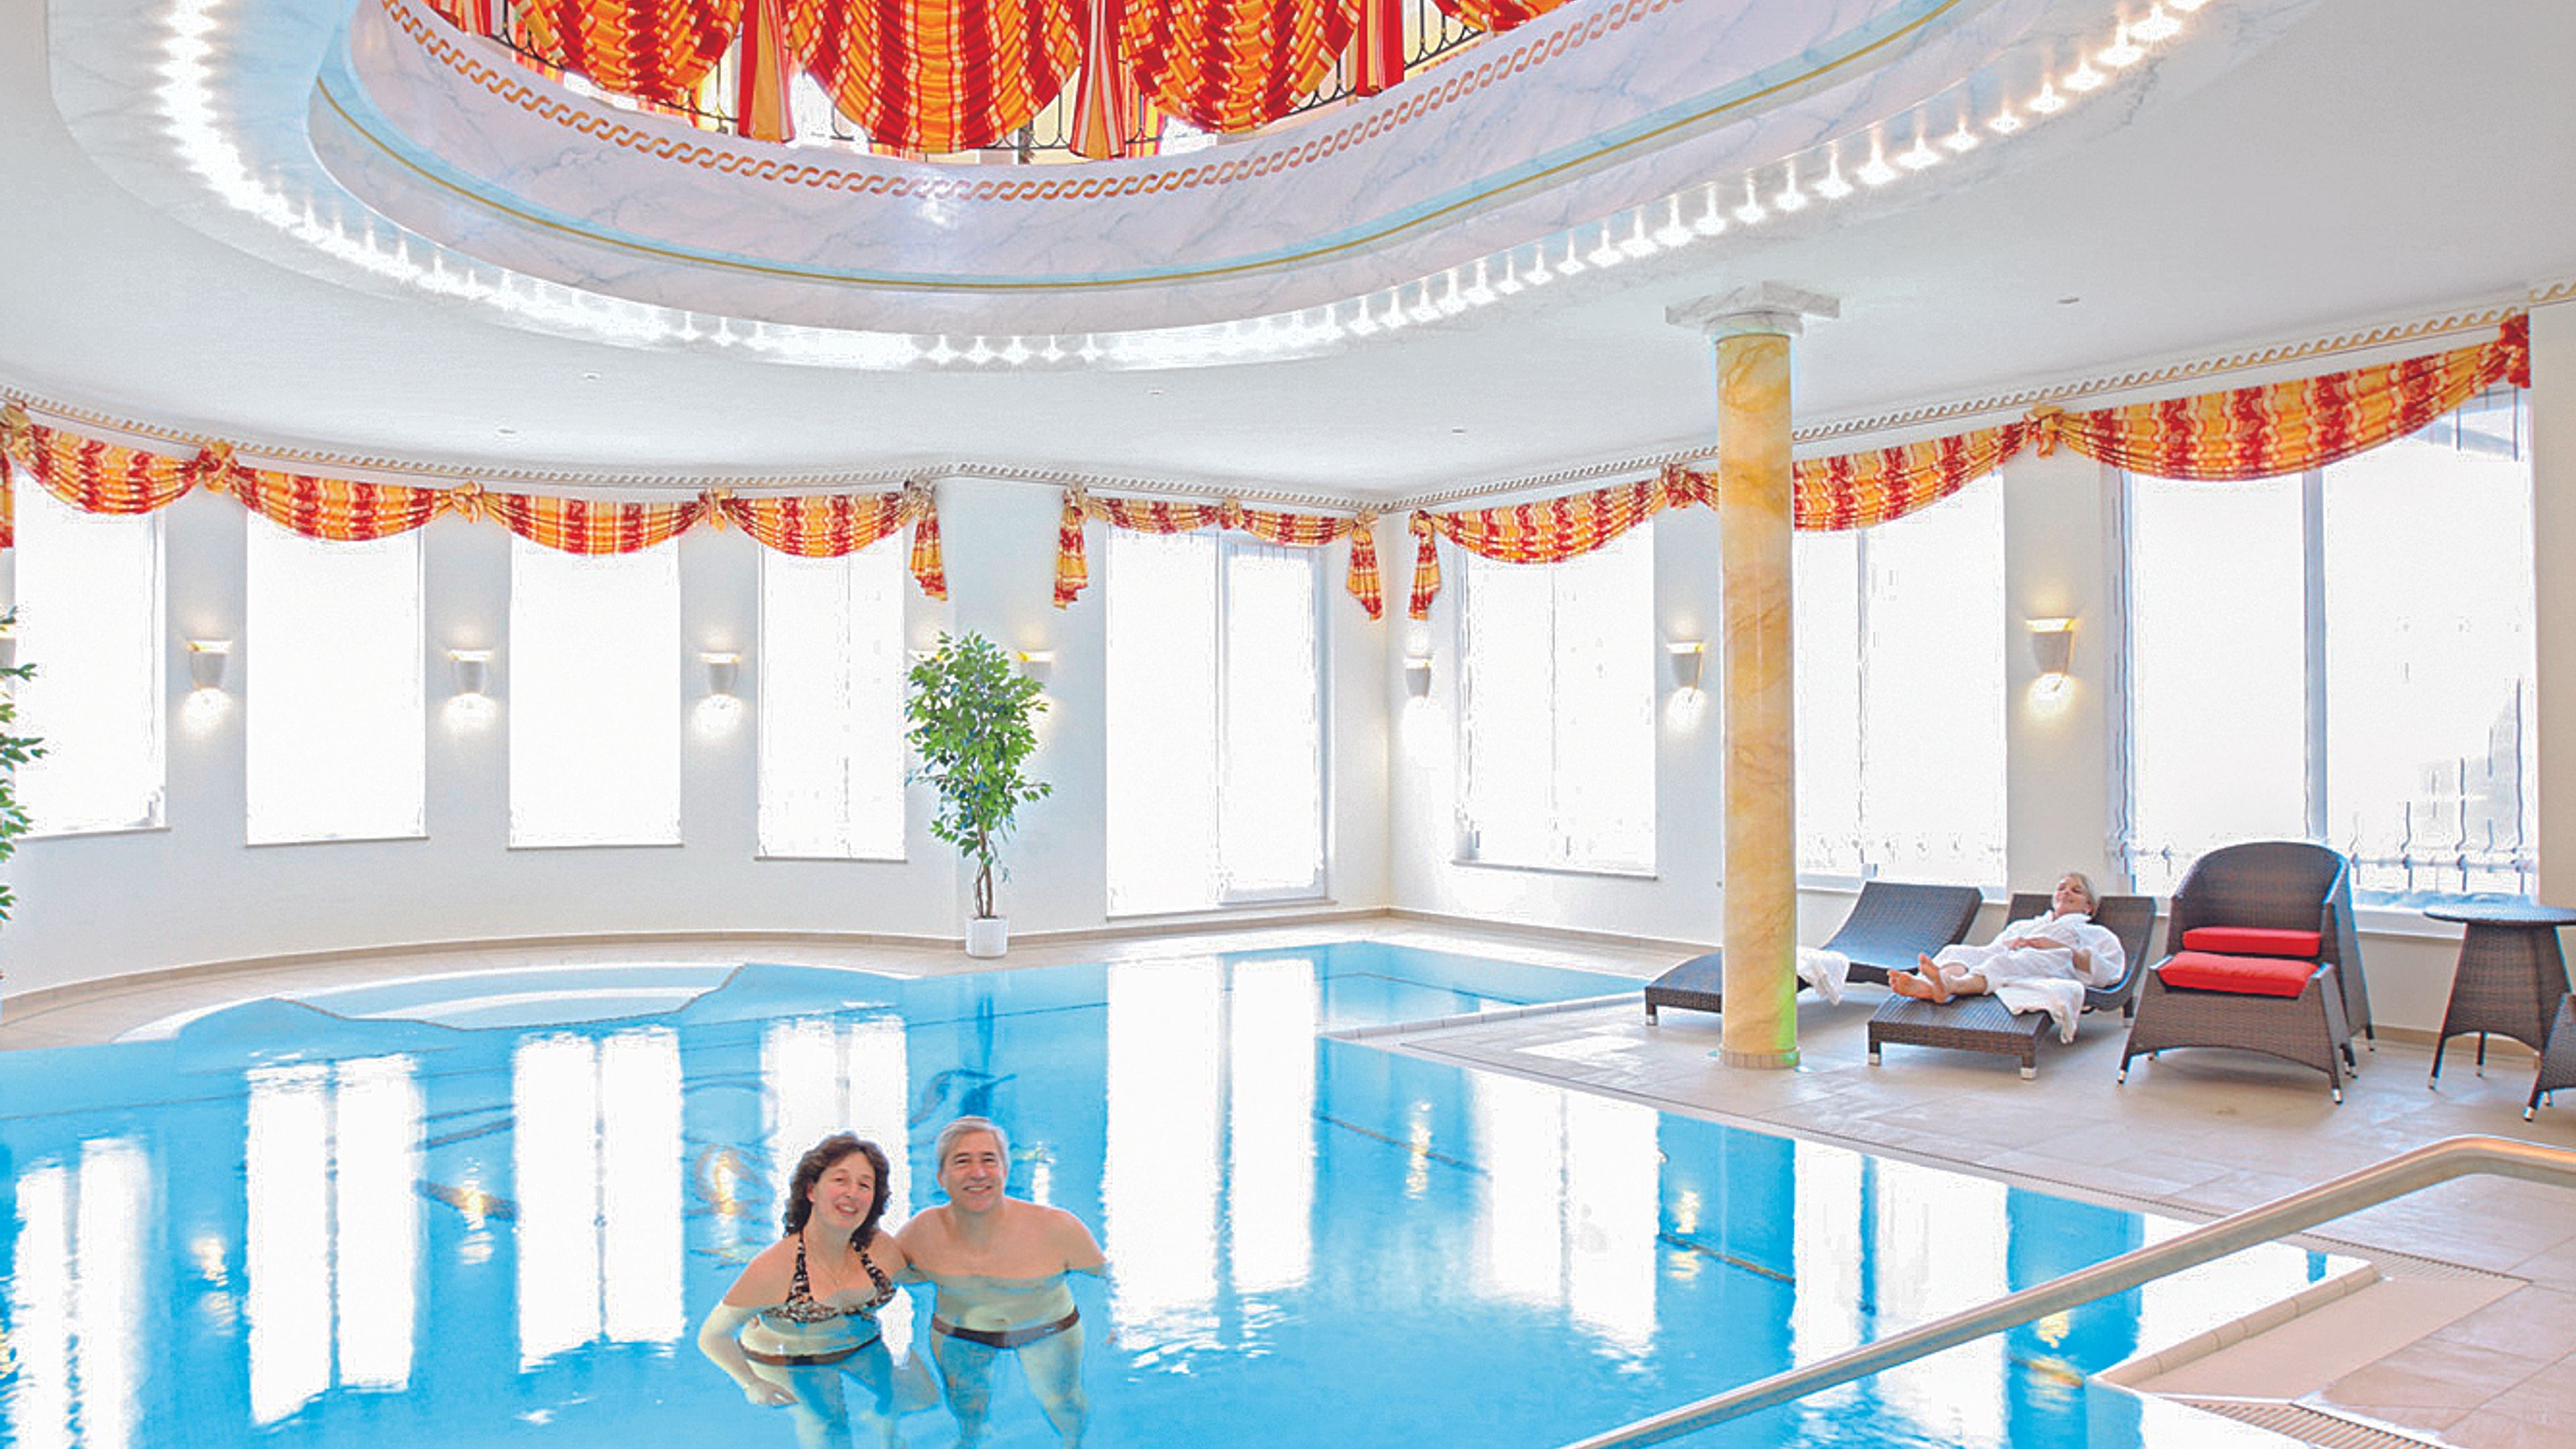 Wellness - Privathotel Post an der Therme